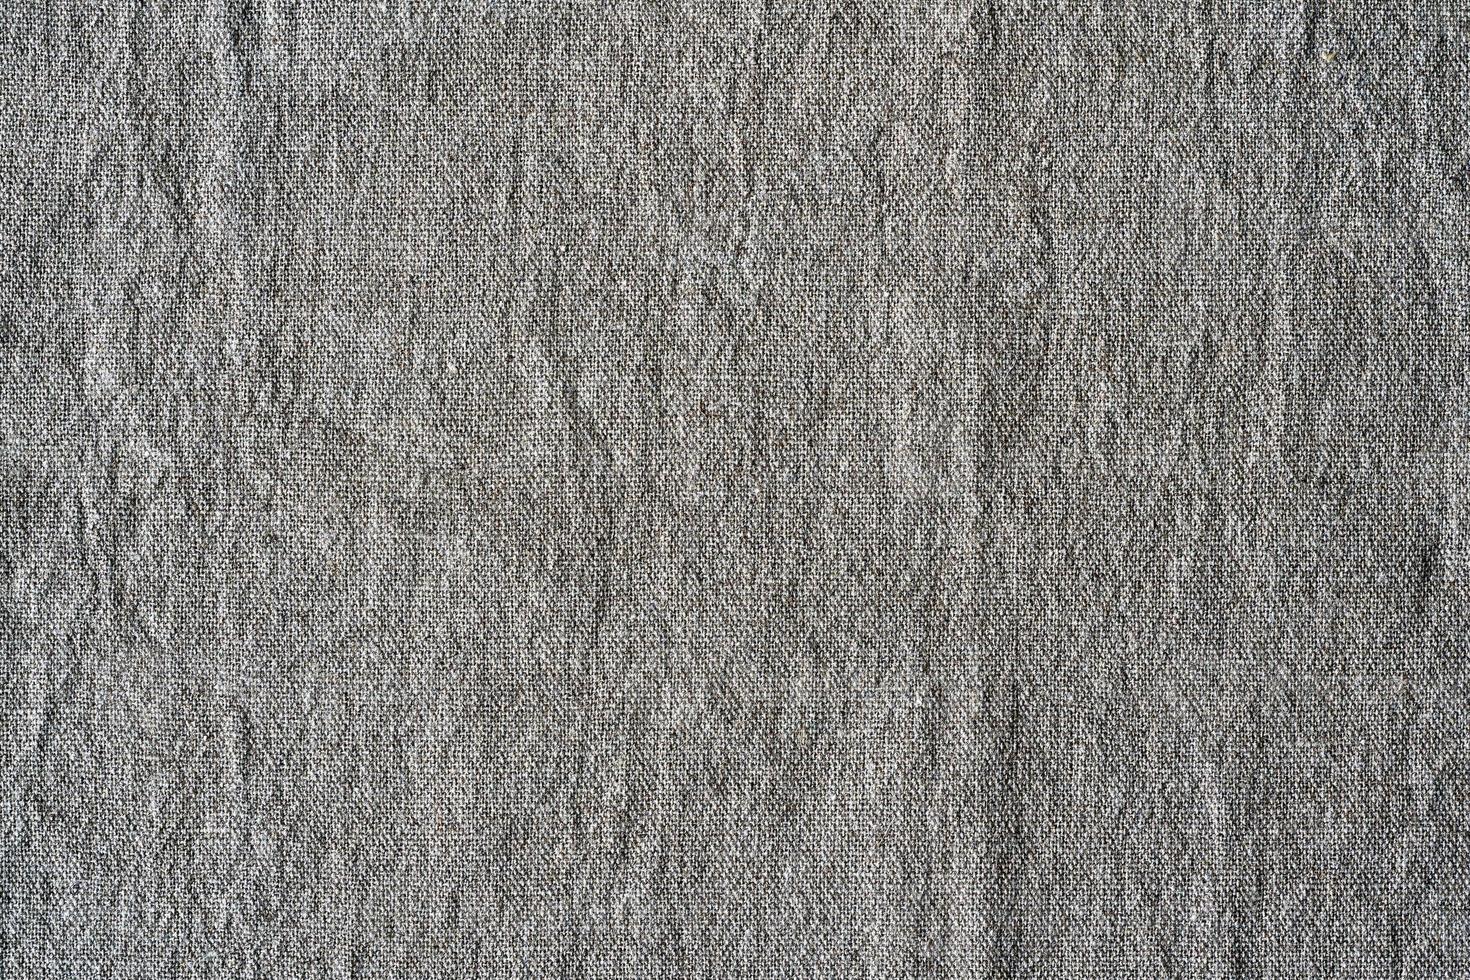 Natural linen texture background. Crumpled fabric of gray color, rough texture photo